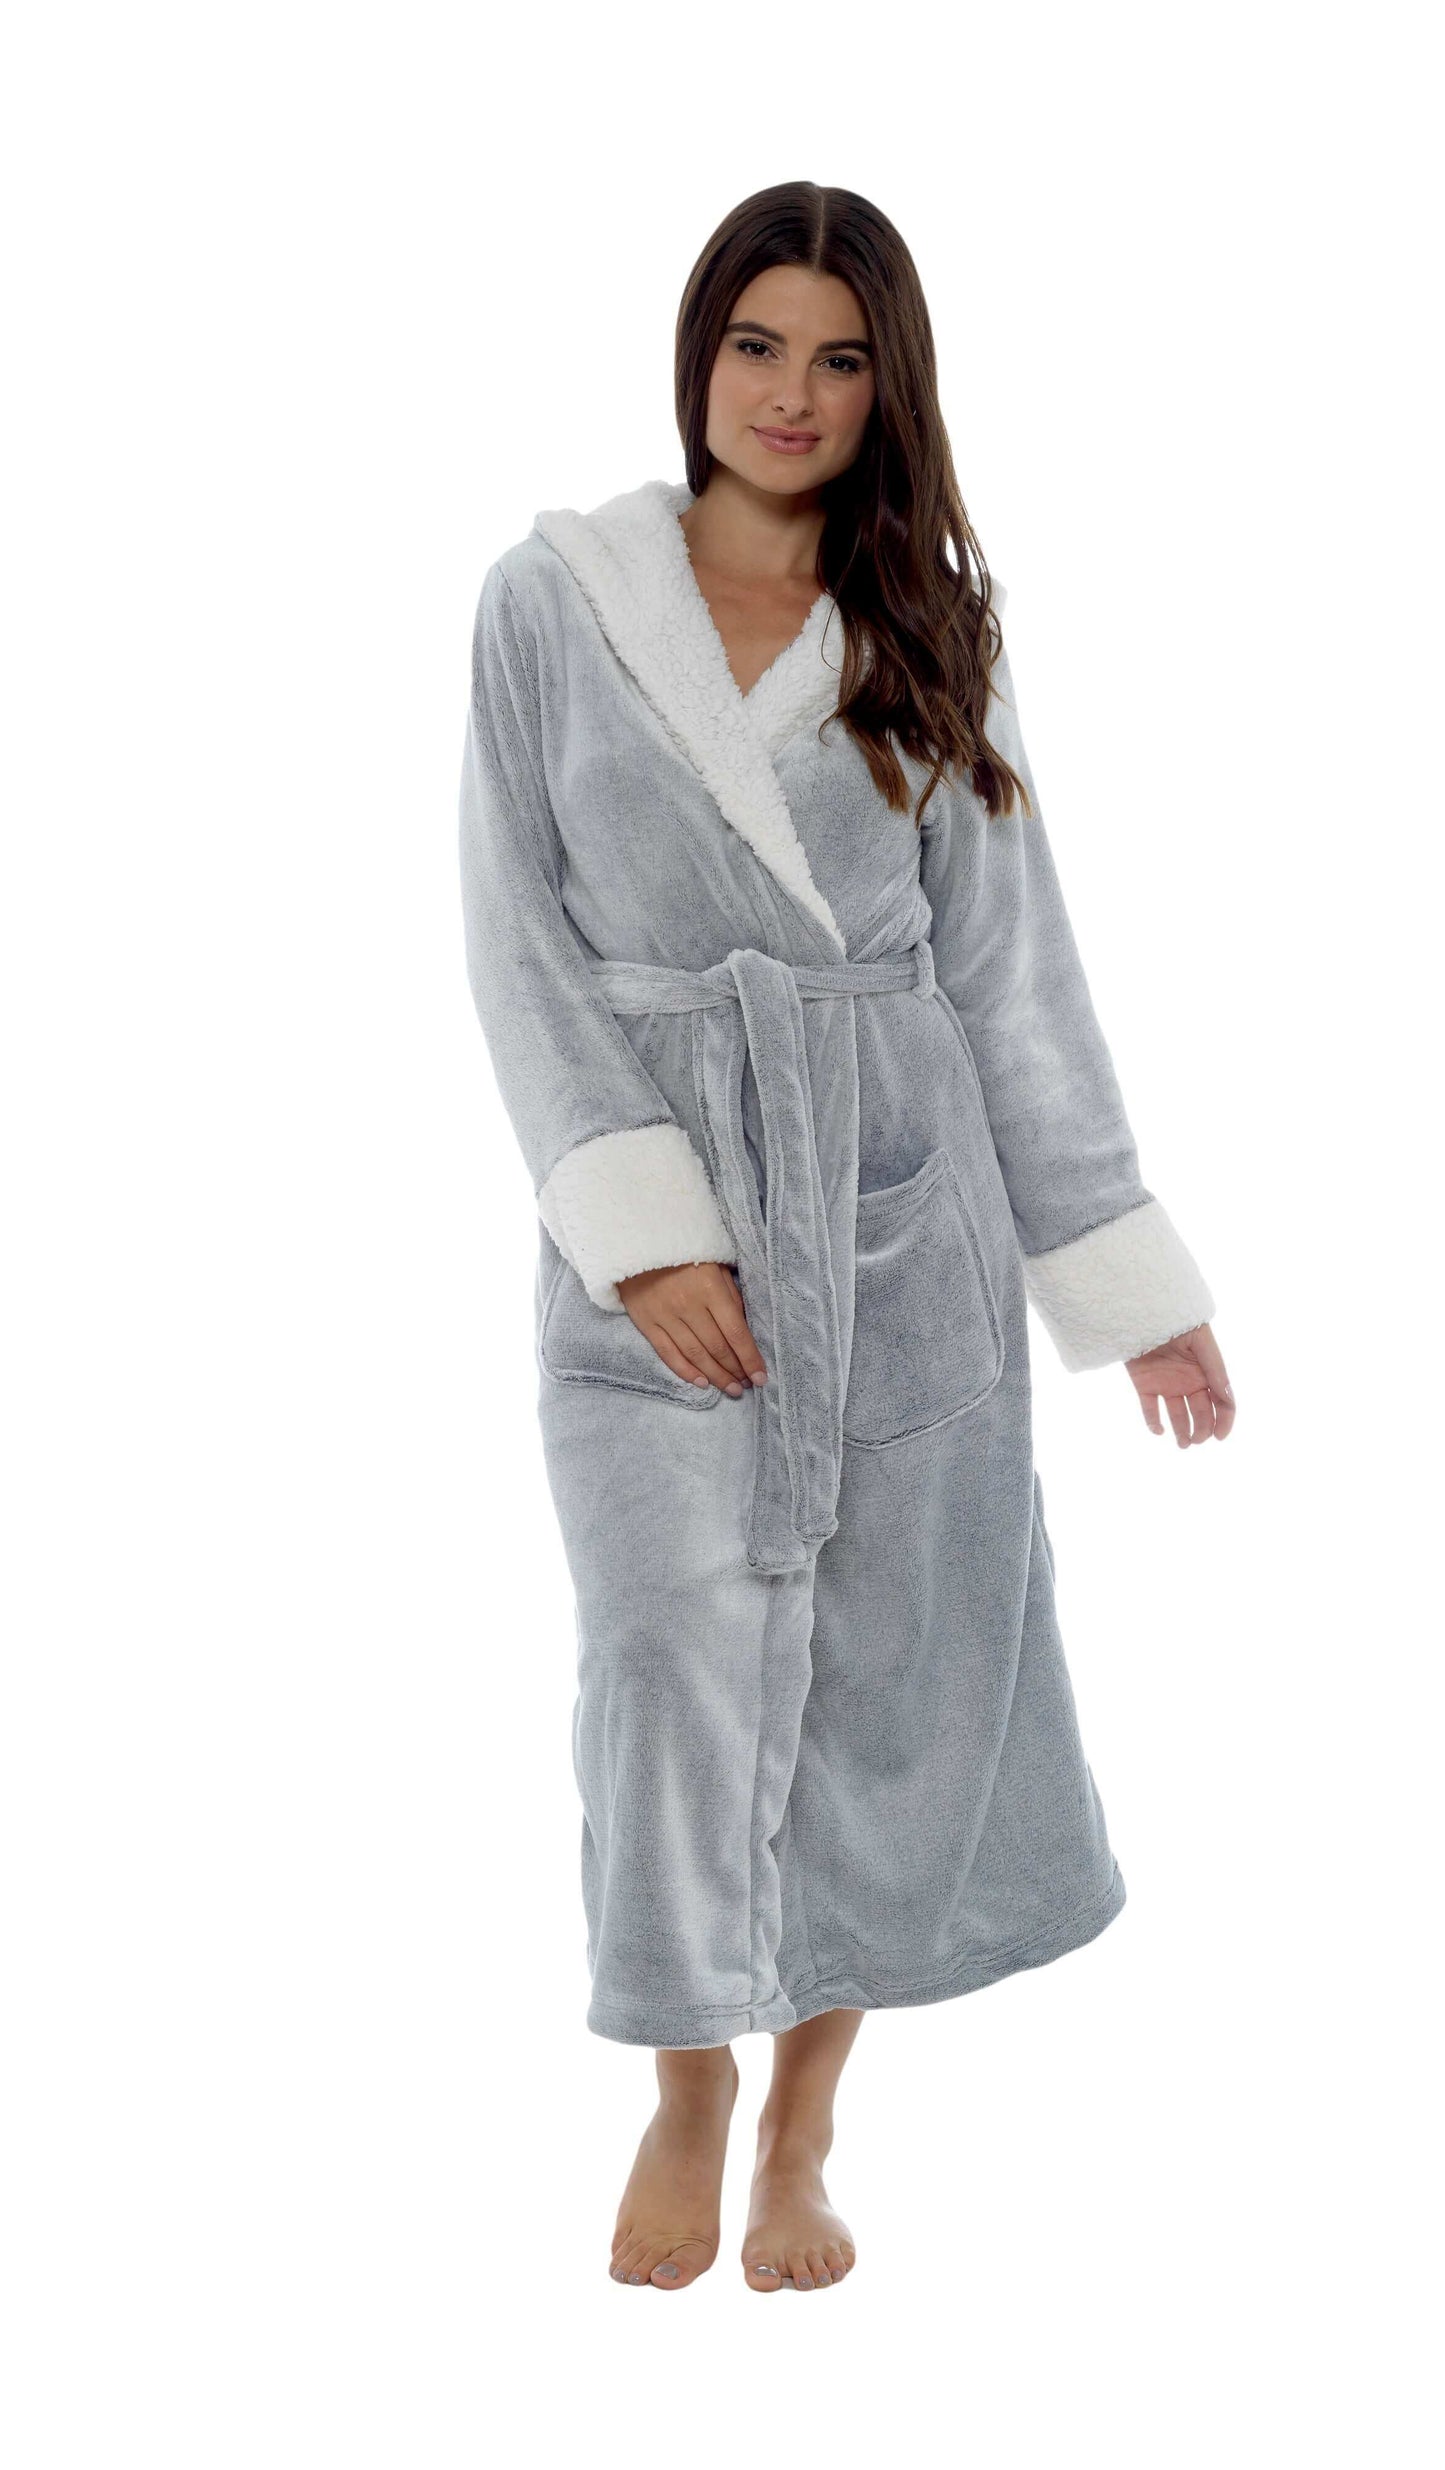 Ladies Luxury Shimmer Fleece Dressing Gown, Women's Soft Plush Bath Robe. Buy now for £20.00. A Robe by Daisy Dreamer. 12-14, 16-18, 20-22, 8-10, bath robe, bathrobe, bathwrap, bridesmaid, chunky lounge, comfortable, cosy, dressing, dressing gown, flannel